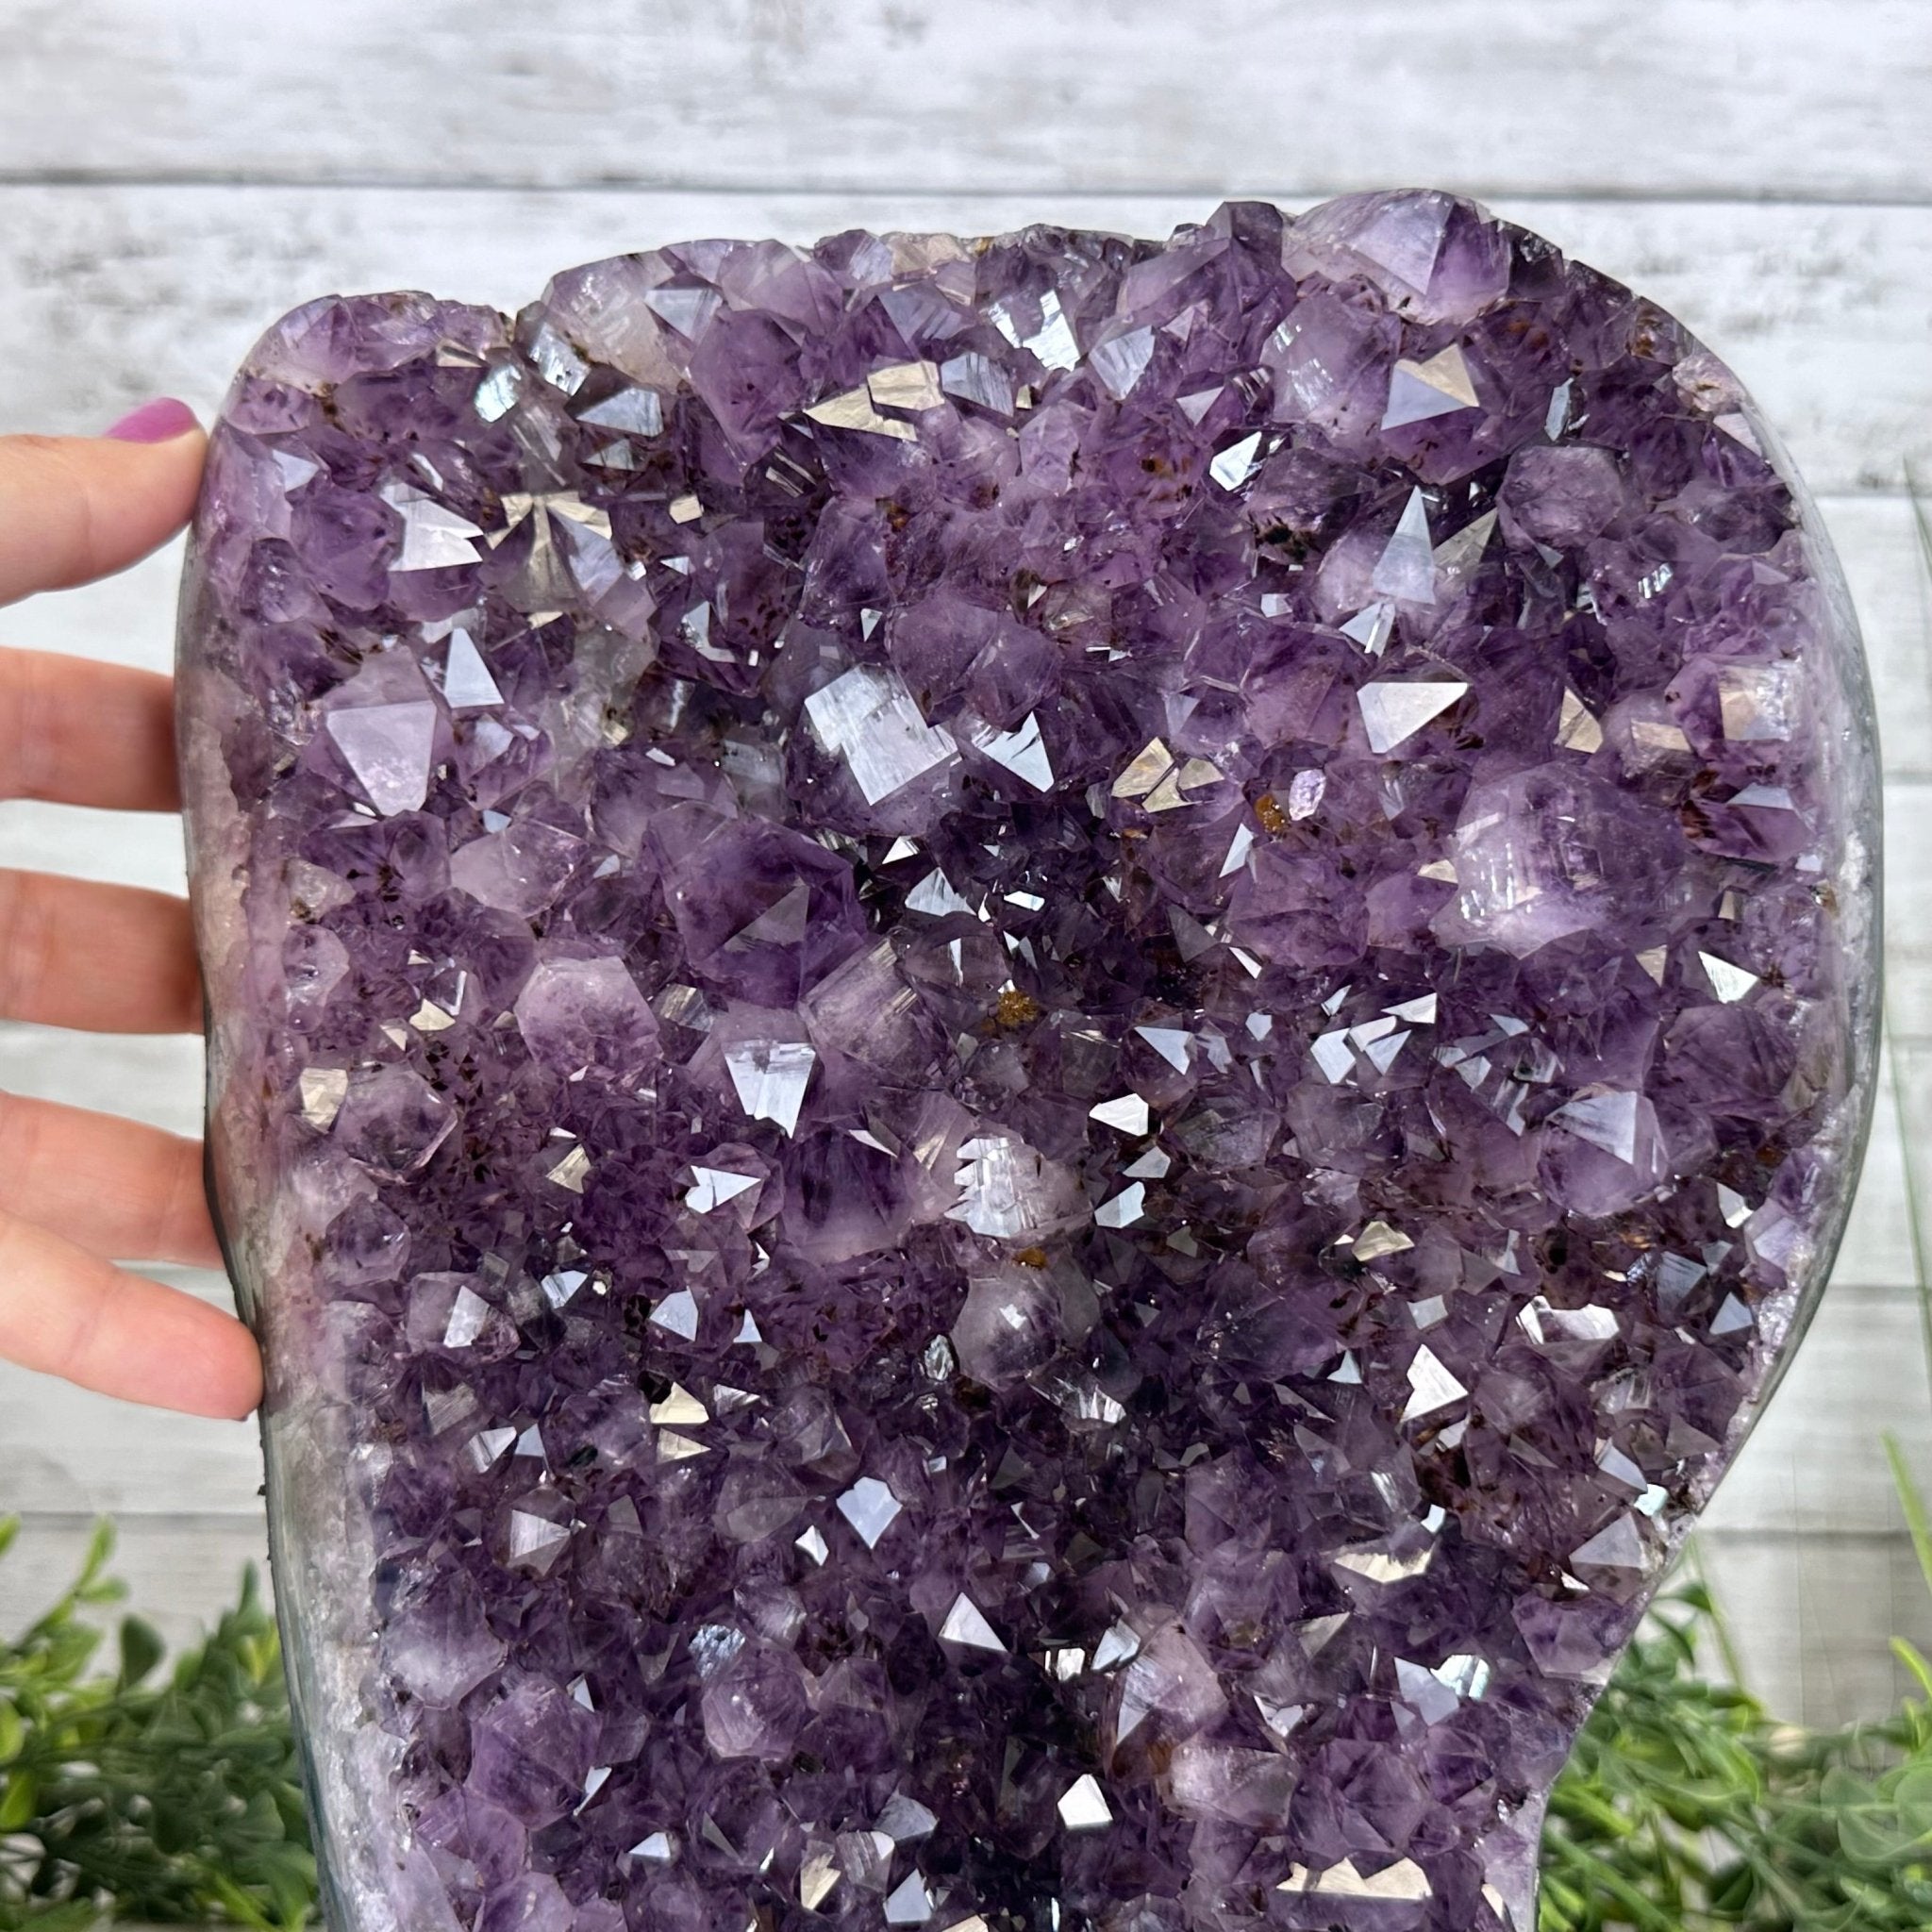 Extra Quality Amethyst Cluster, Cement Base, 12.5" Tall #5614-0117 - Brazil GemsBrazil GemsExtra Quality Amethyst Cluster, Cement Base, 12.5" Tall #5614-0117Clusters on Cement Bases5614-0117